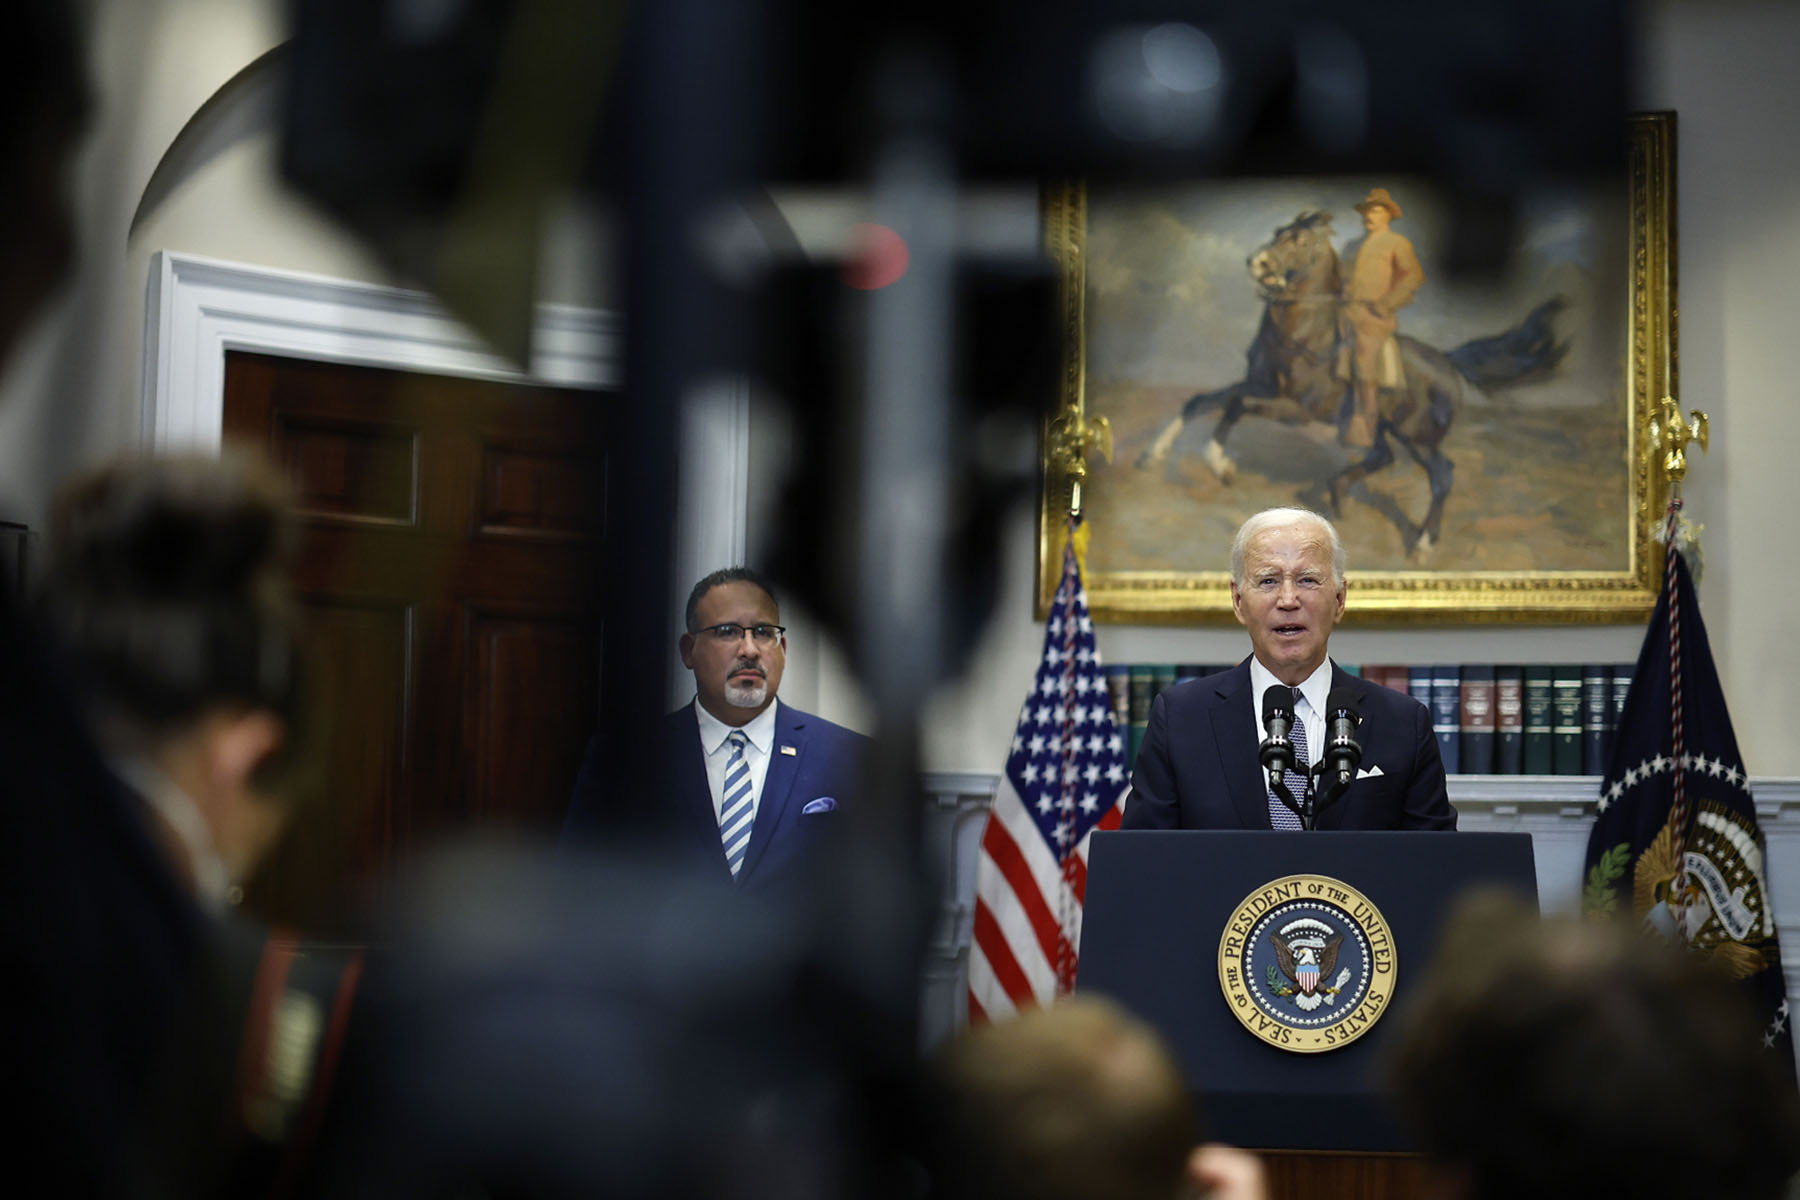 President Biden is joined by Education Secretary Miguel Cardona as he announces new actions to protect borrowers at the White House.